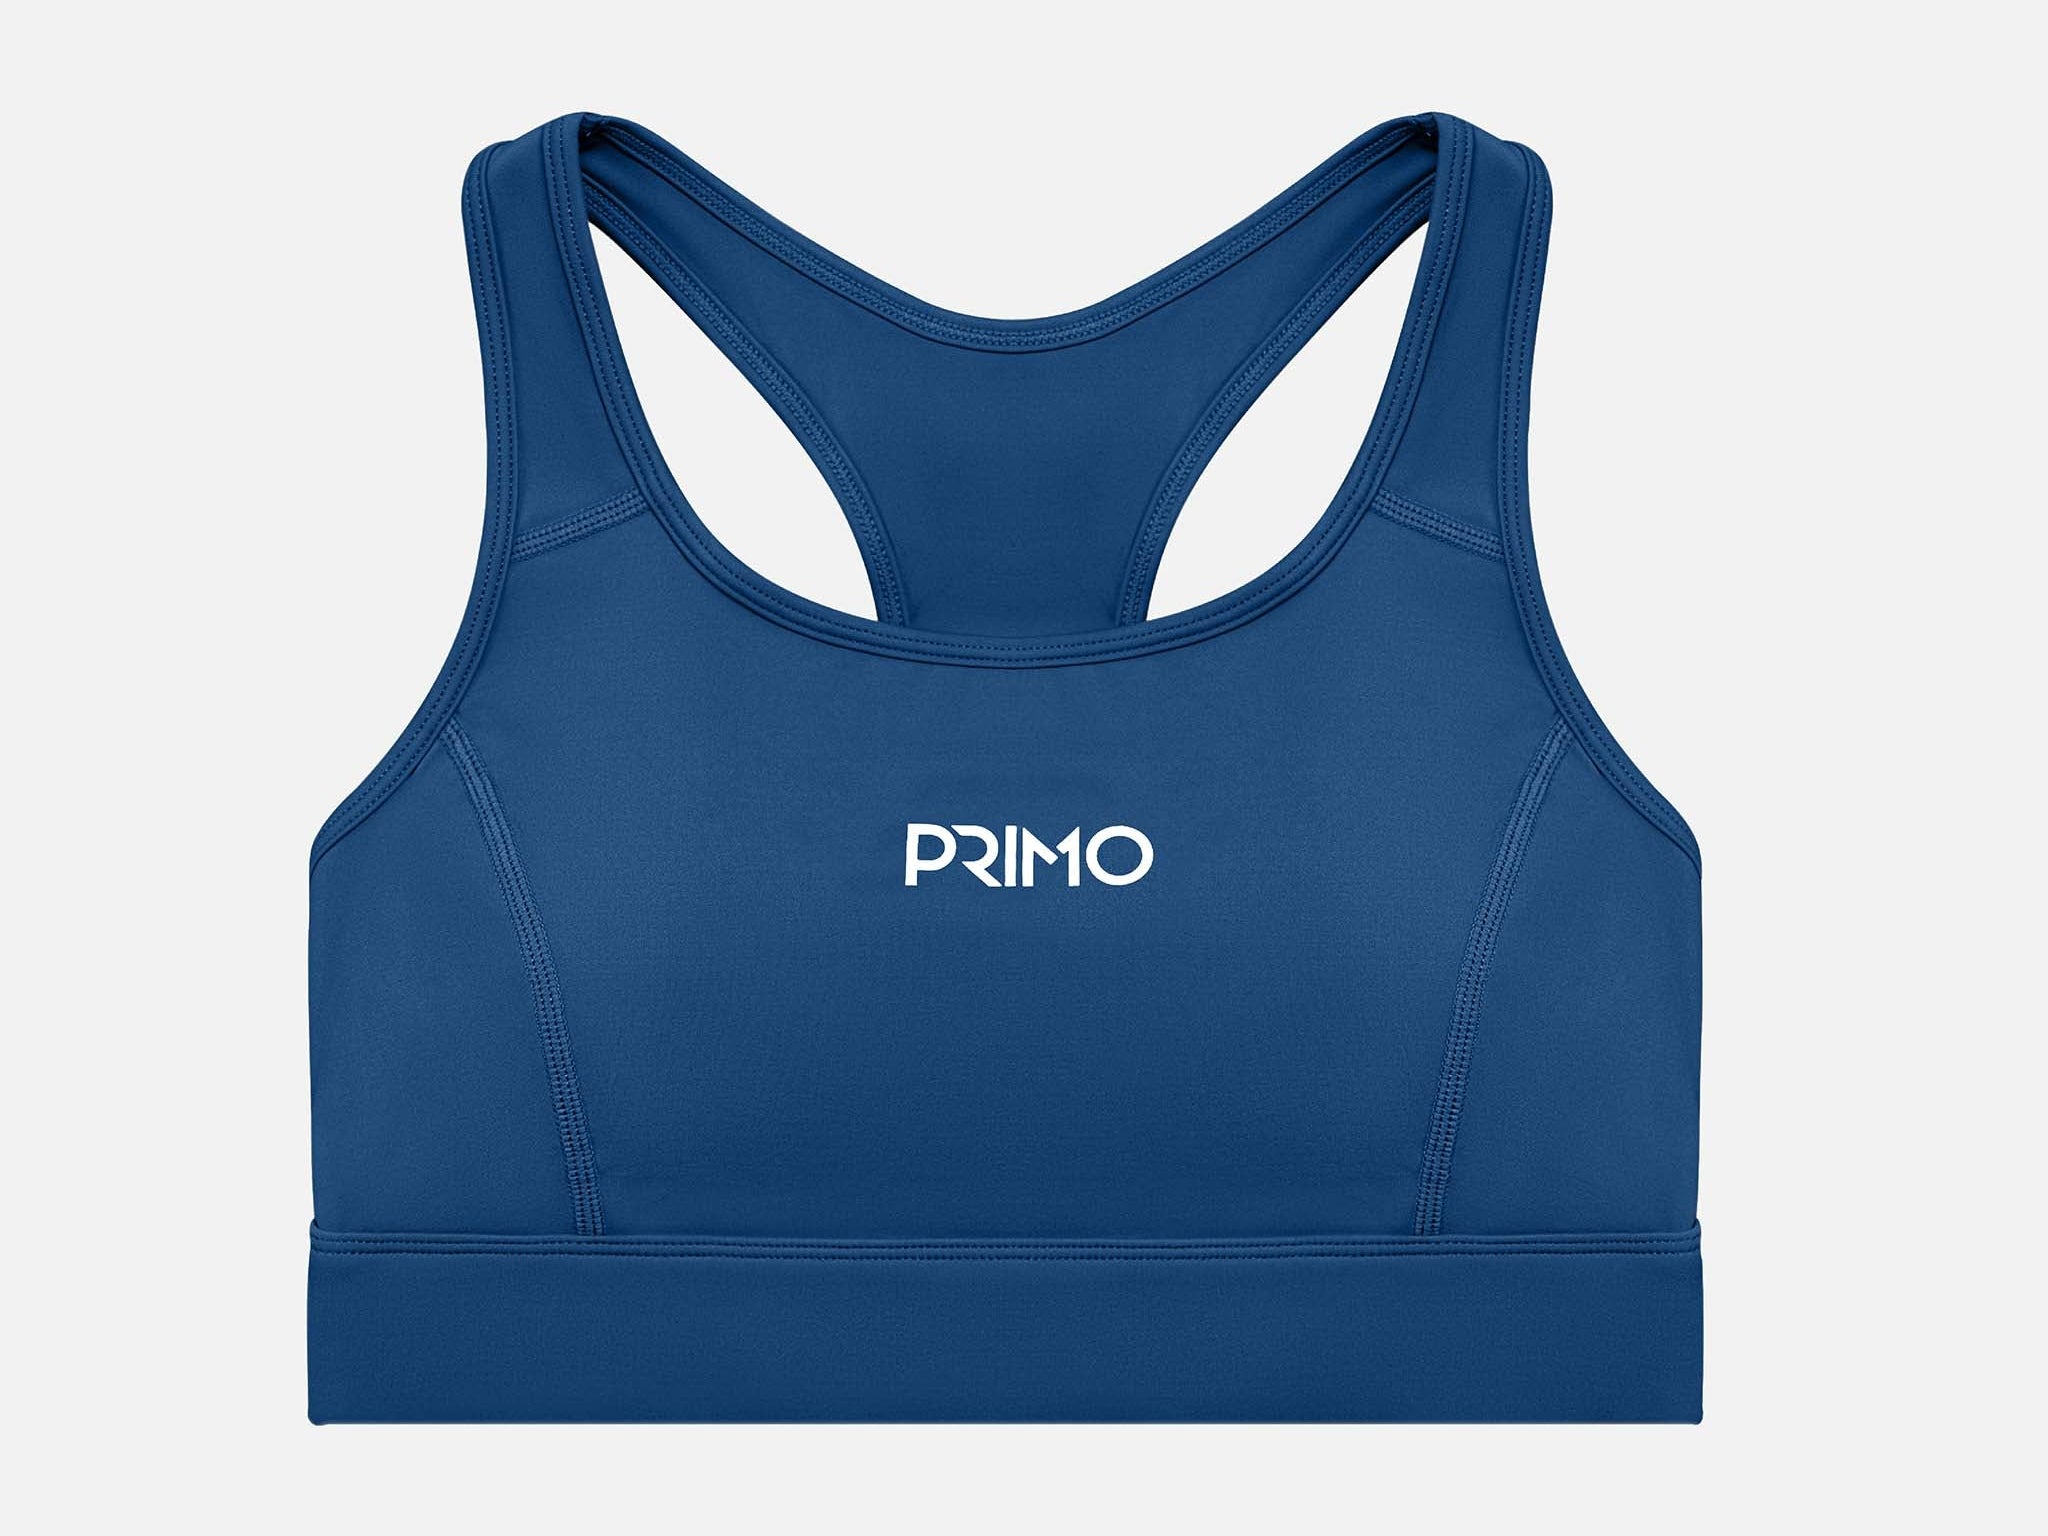 Primo Fight Wear Official Air Sports Bra - Navy